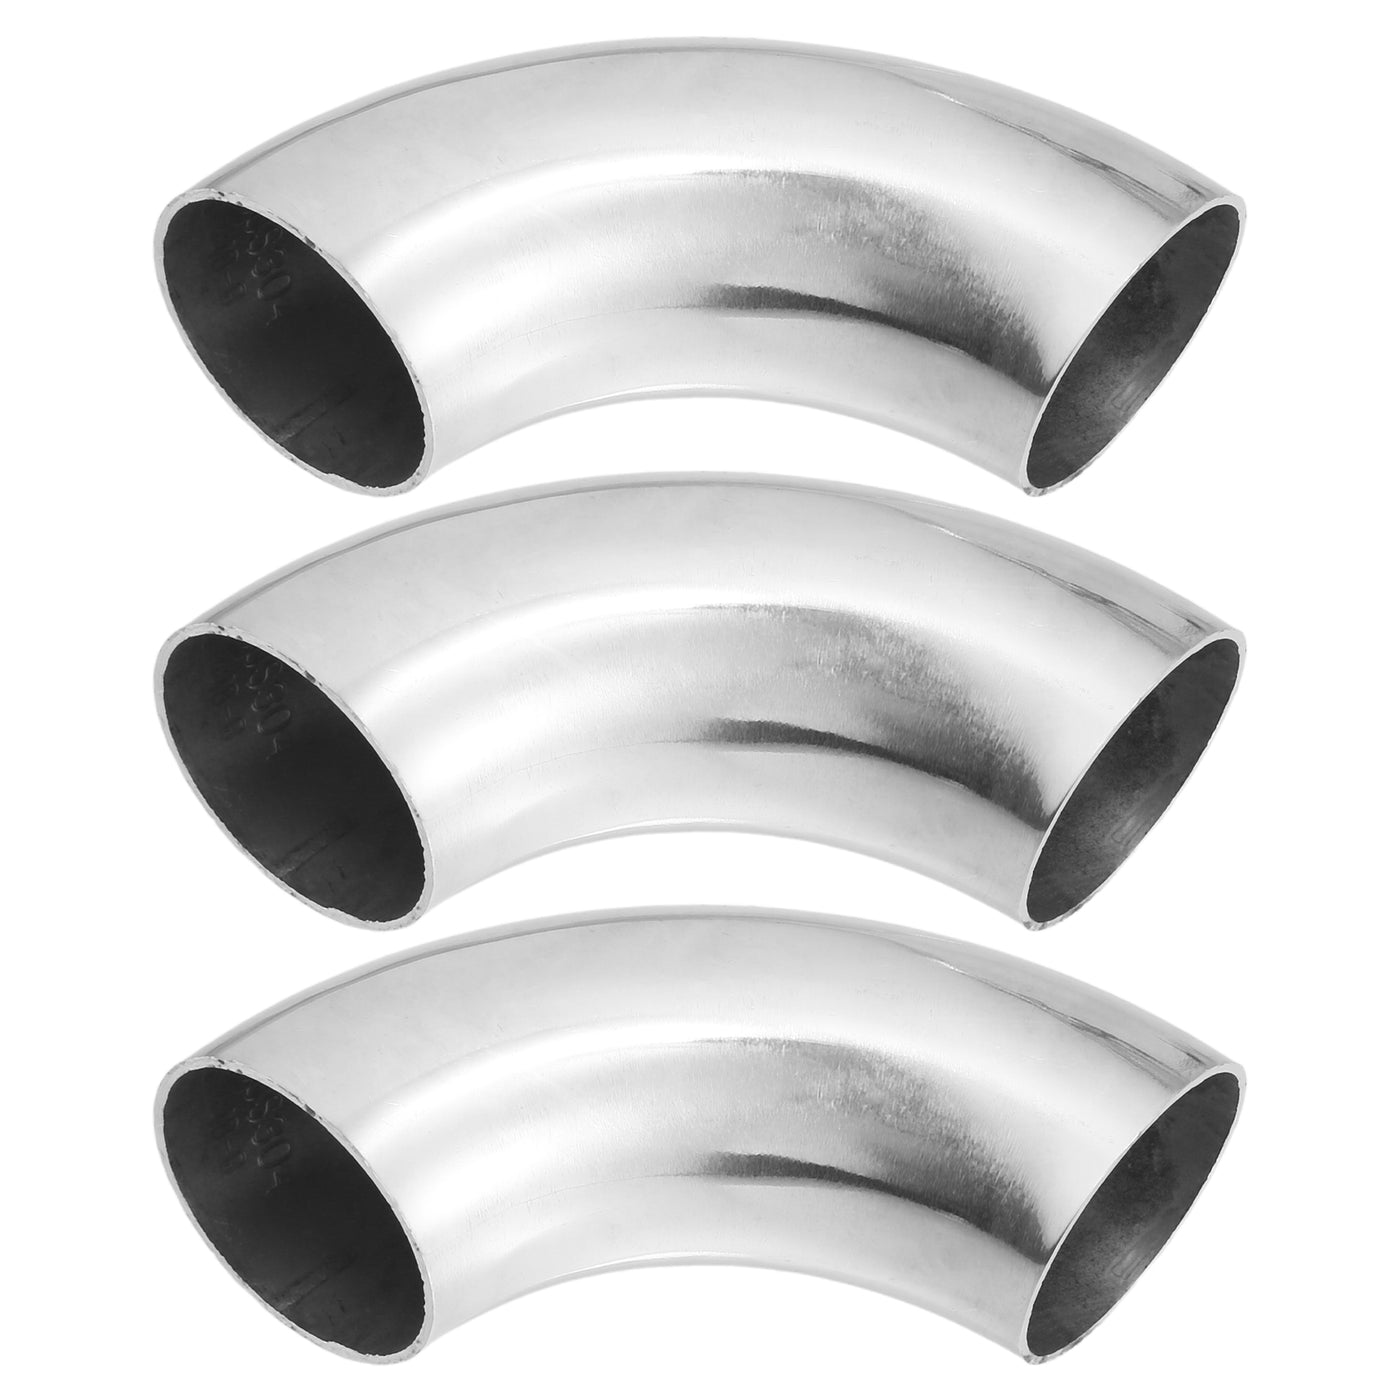 uxcell Uxcell 3pcs 90 Degree Mandrel Bend Elbow SS304 Stainless Steel Bend Tube Exhaust Elbow Pipe for Car Arc Length 130mm Silver Tone